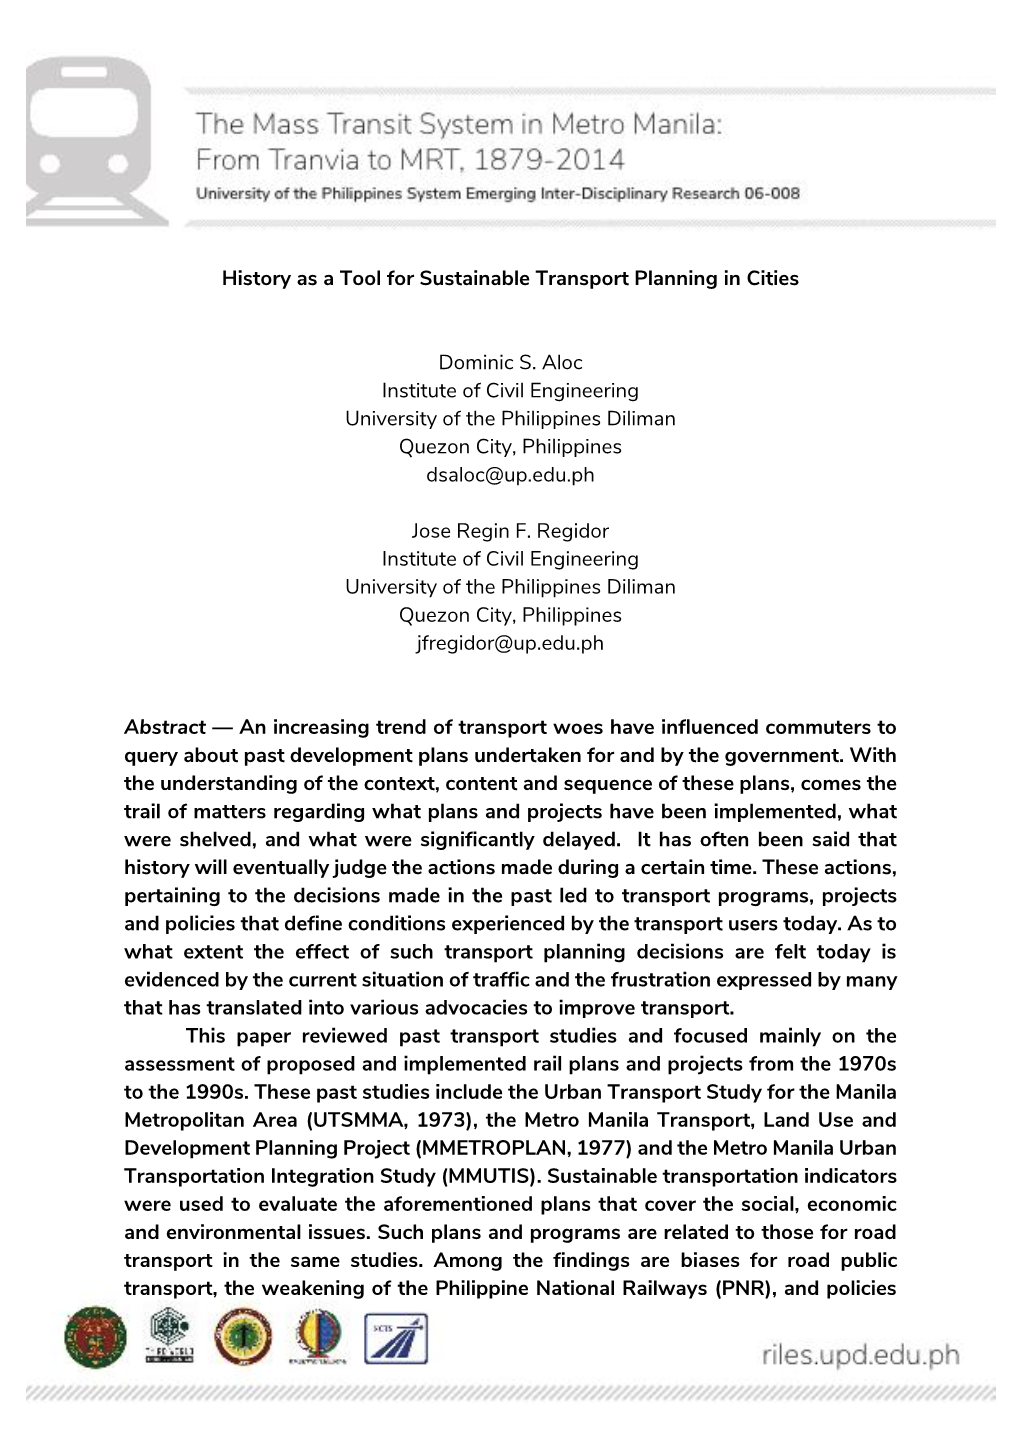 History As a Tool for Sustainable Transport Planning in Cities